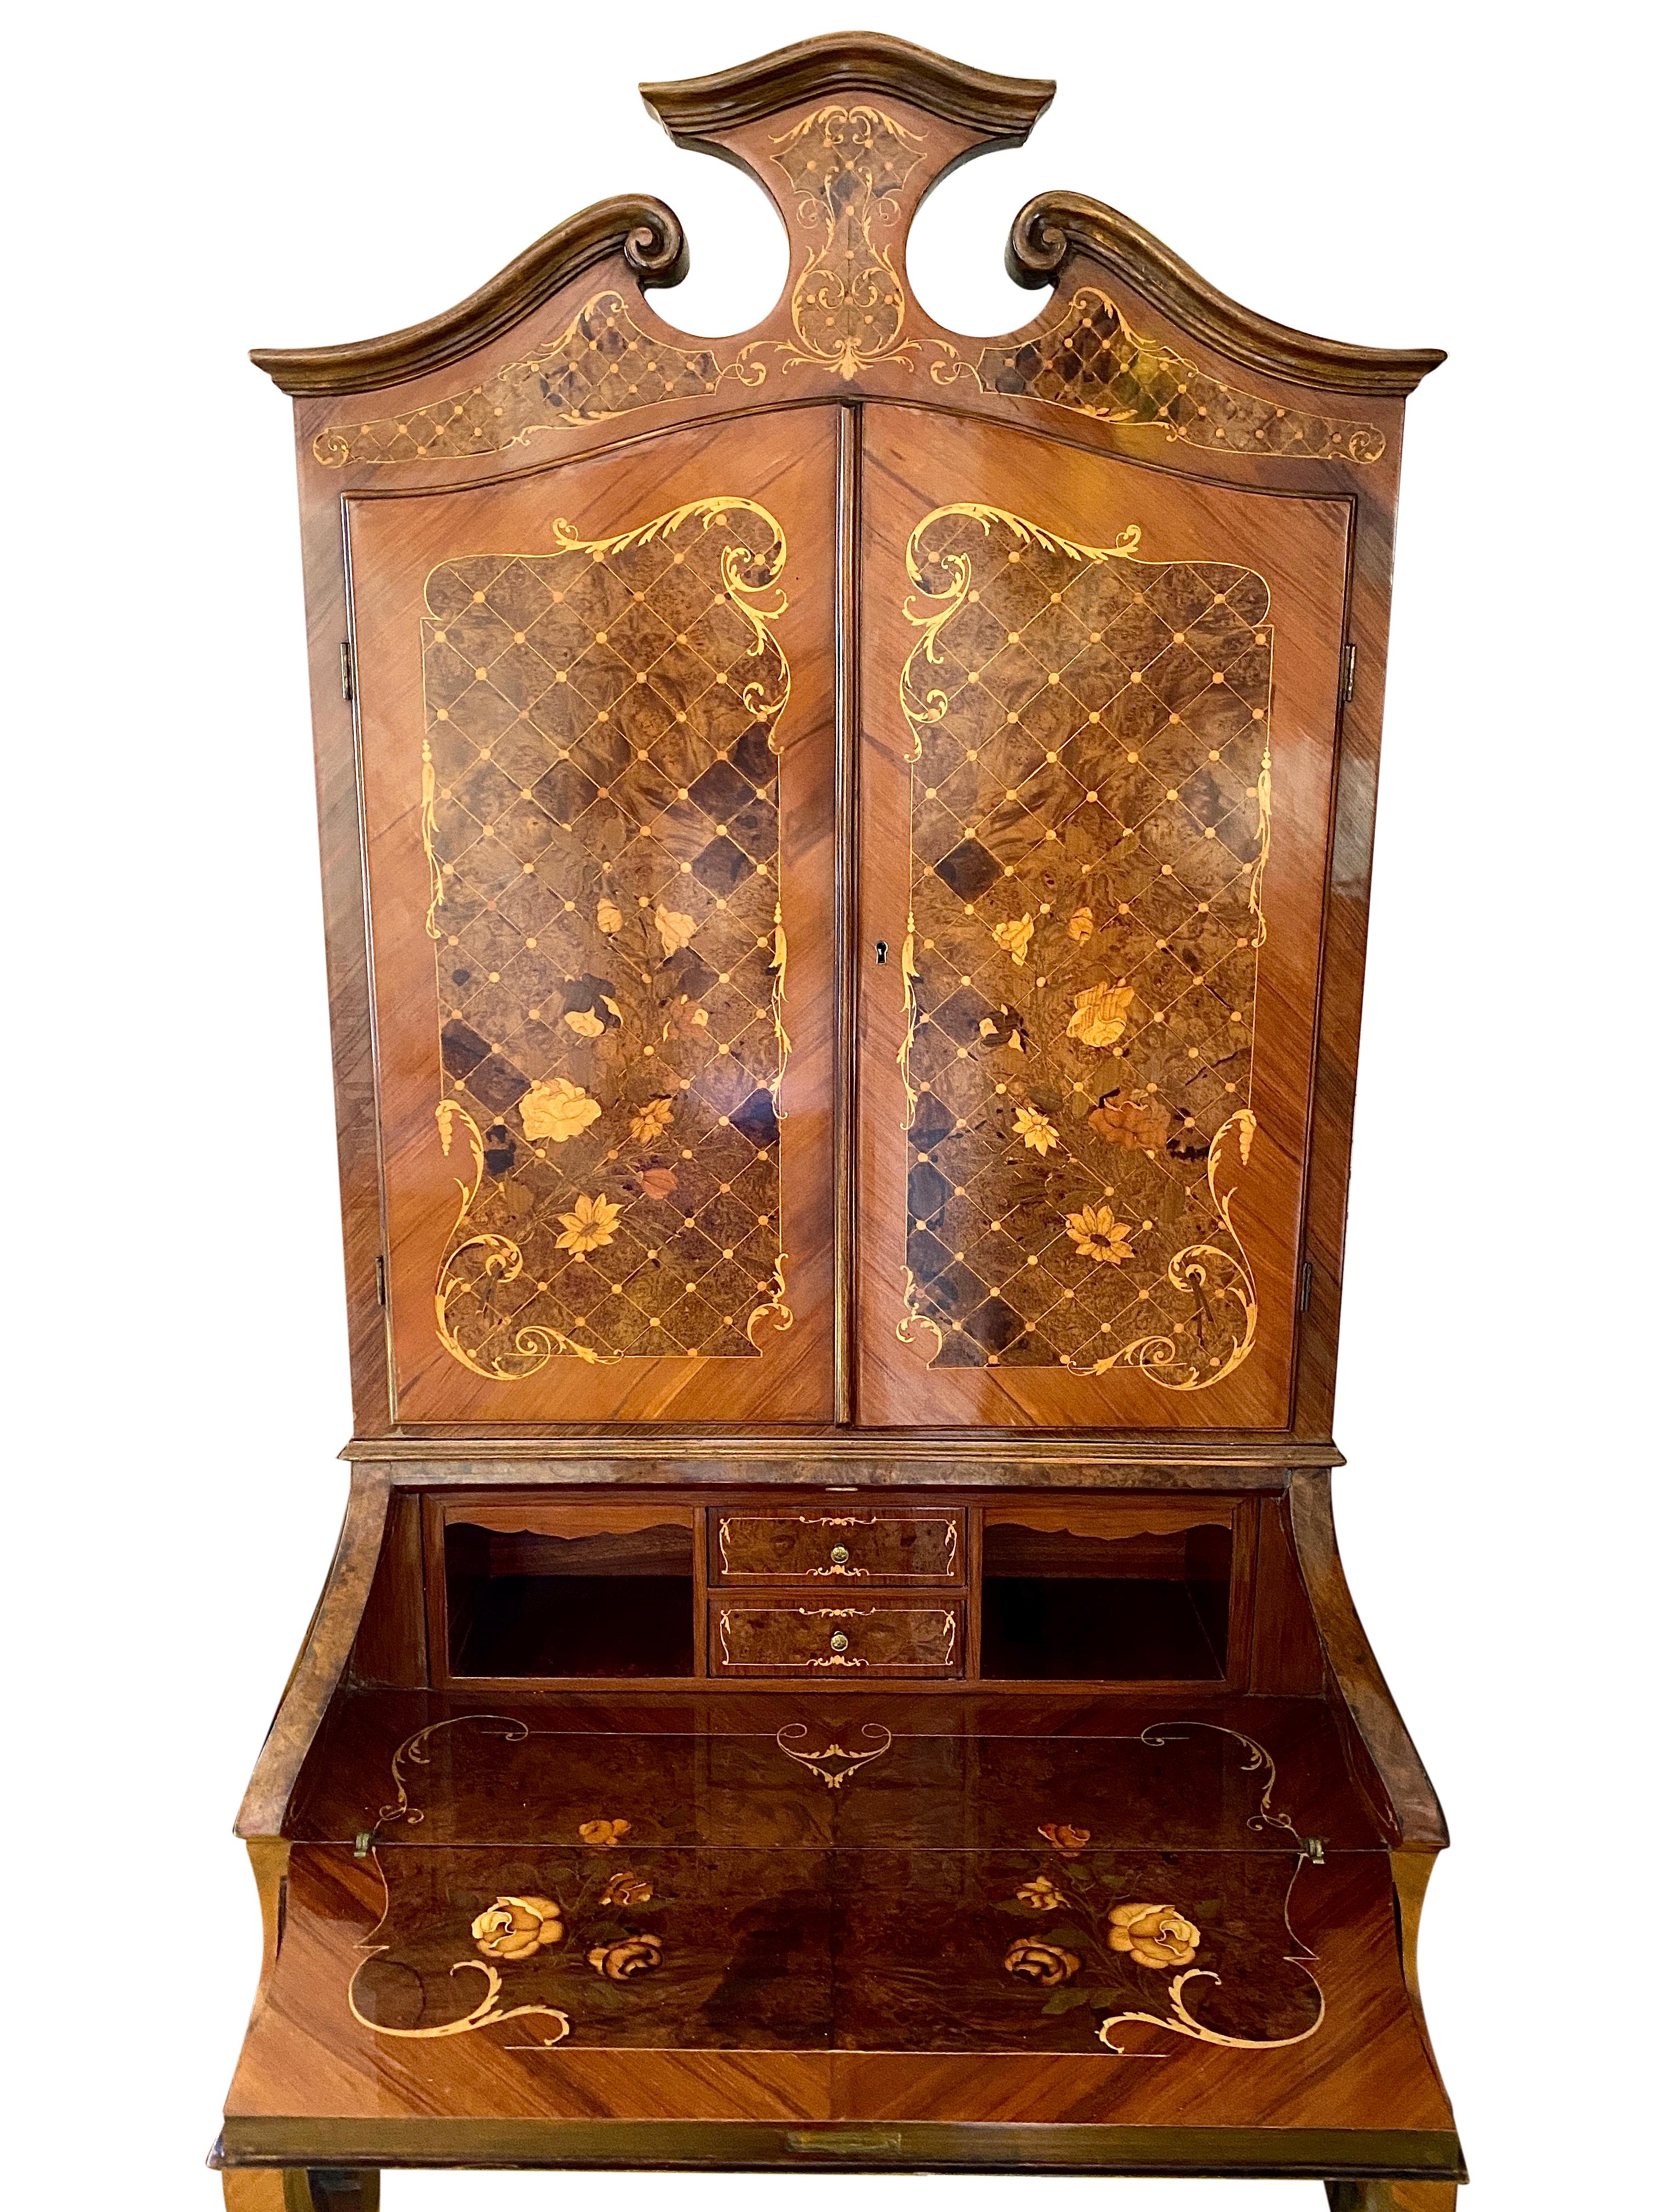 This Italian Satinwood Secretaire is very elegant with exquisite detailing over the entire piece with marquetry inlay. It features an Italian broken pediment, delicate Cabriole legs, and Ormolu feet. There is some subtle wear on the veneer of the